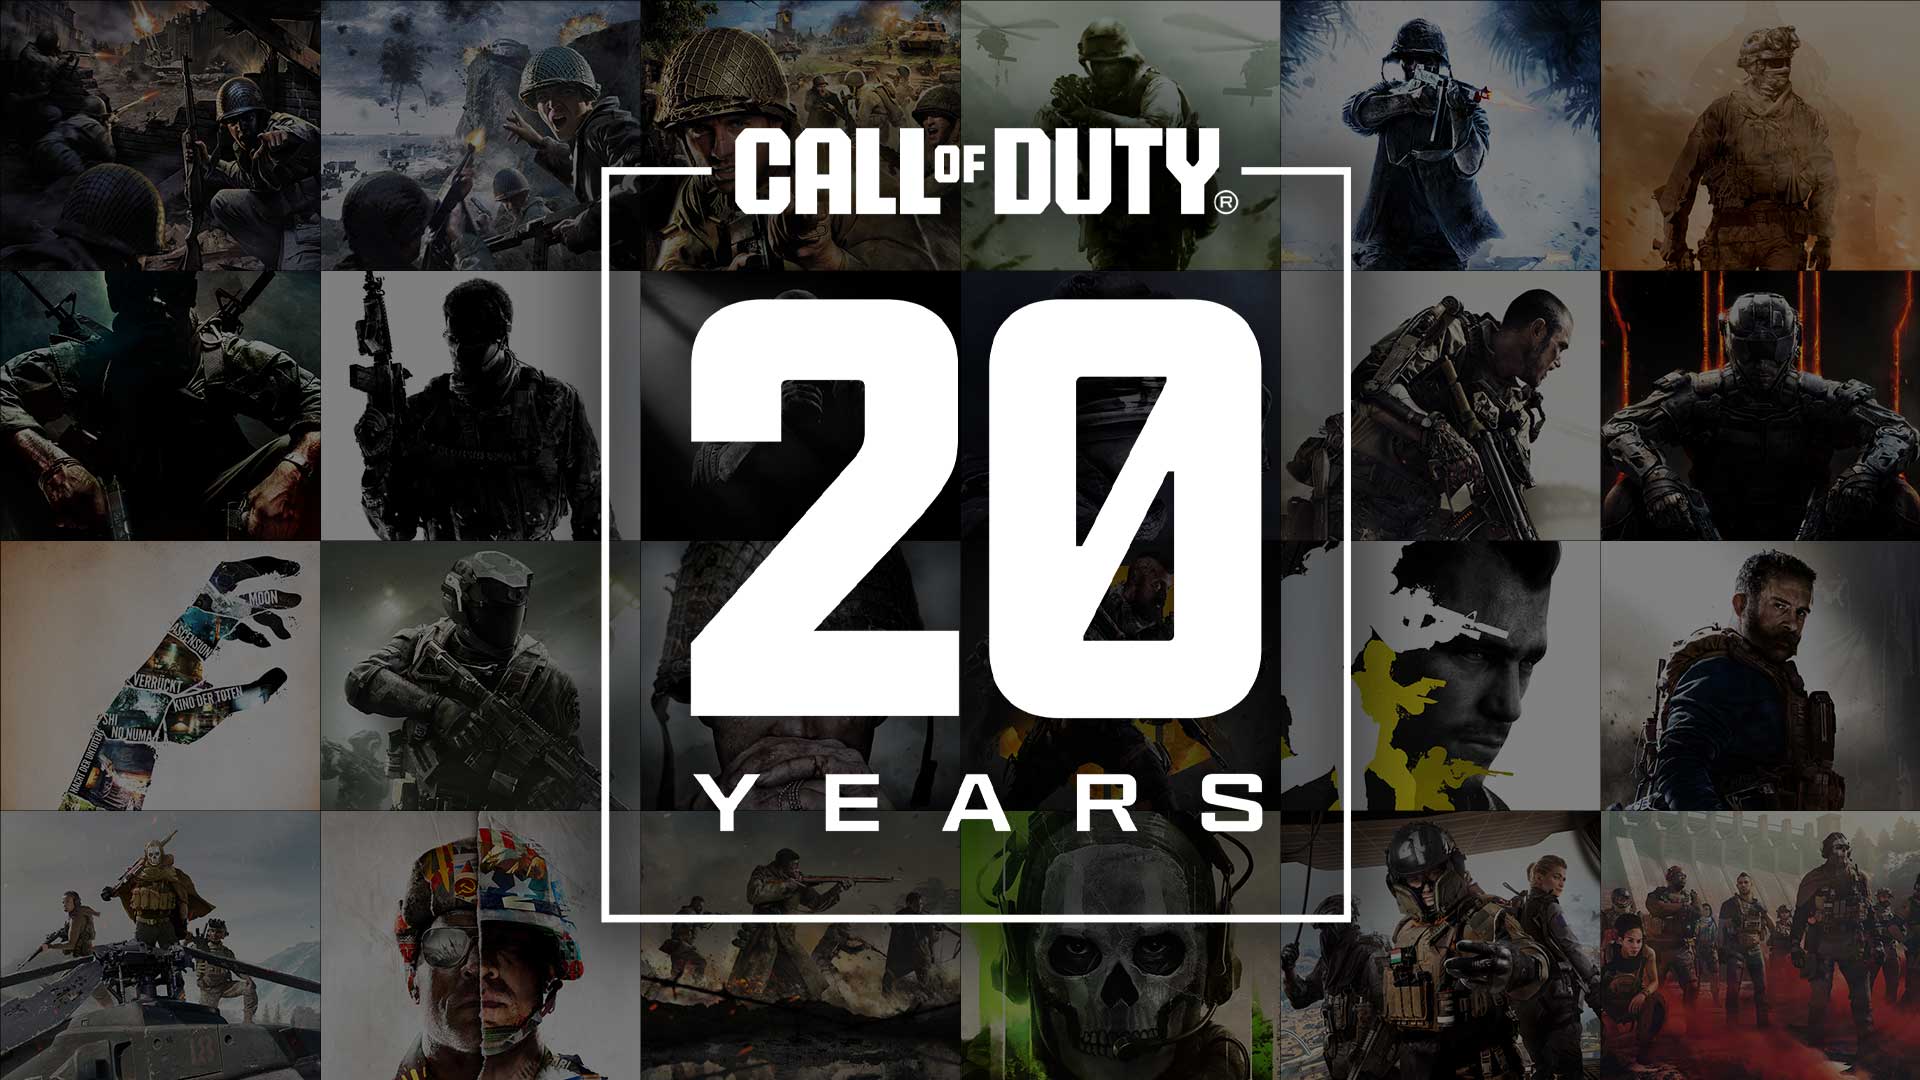 Celebrating the Anniversary of Call of Duty